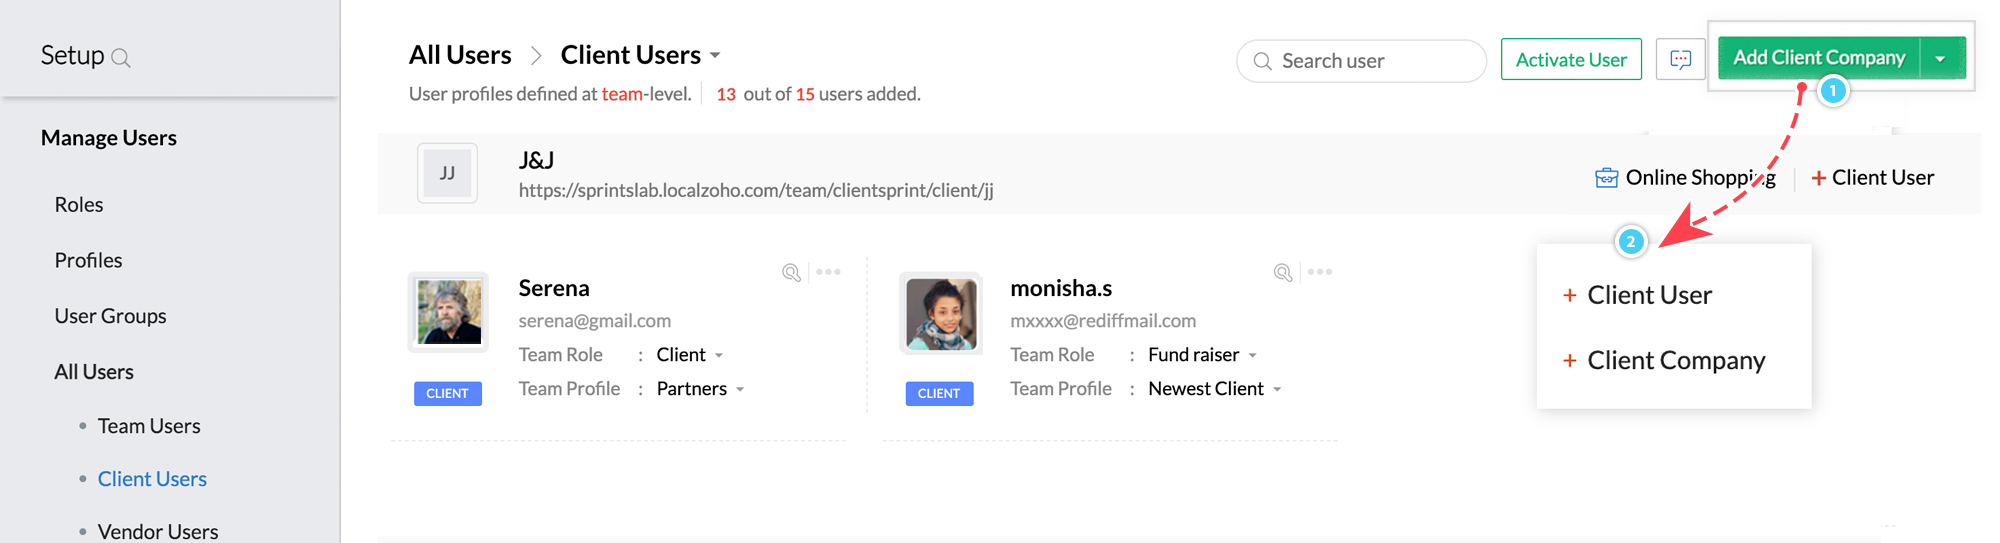 Client Users in Zoho Sprints